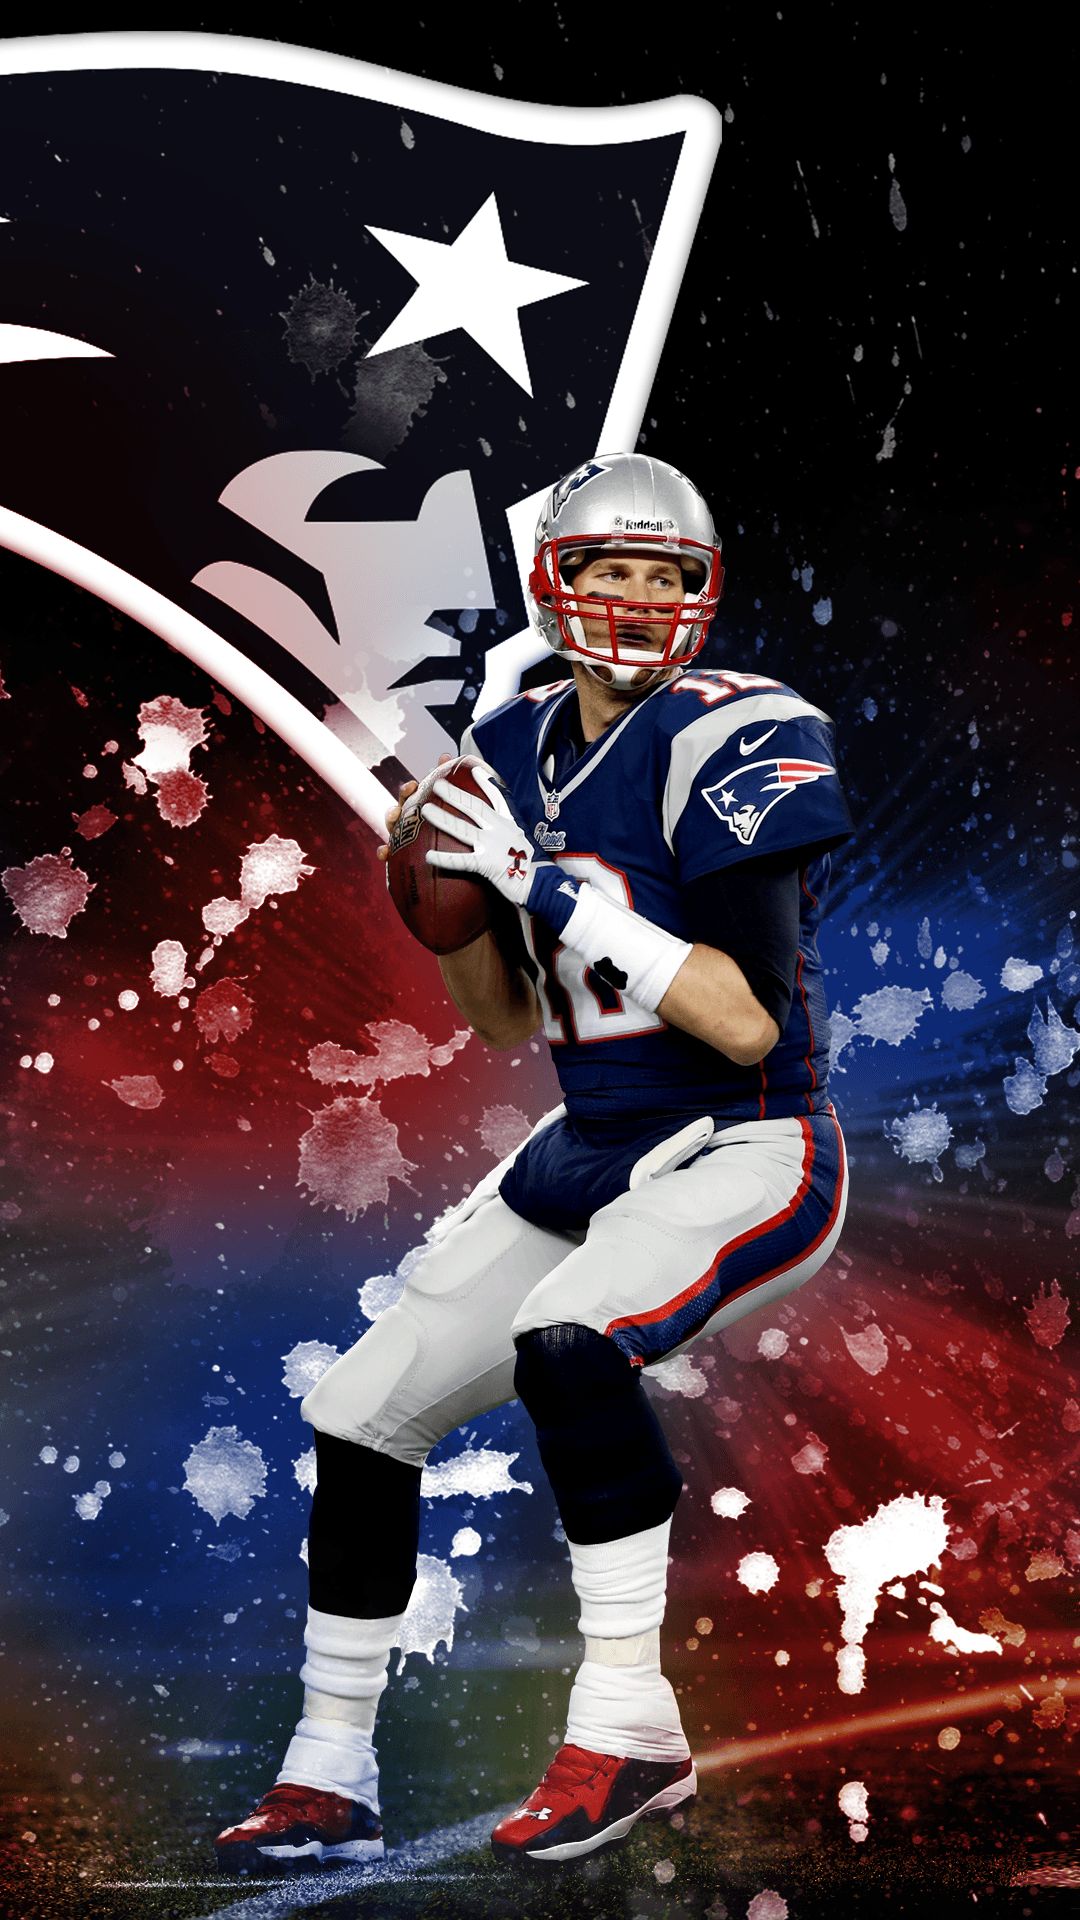 I made a Tom Brady phone wallpaper for my fellow Champions :) Hope